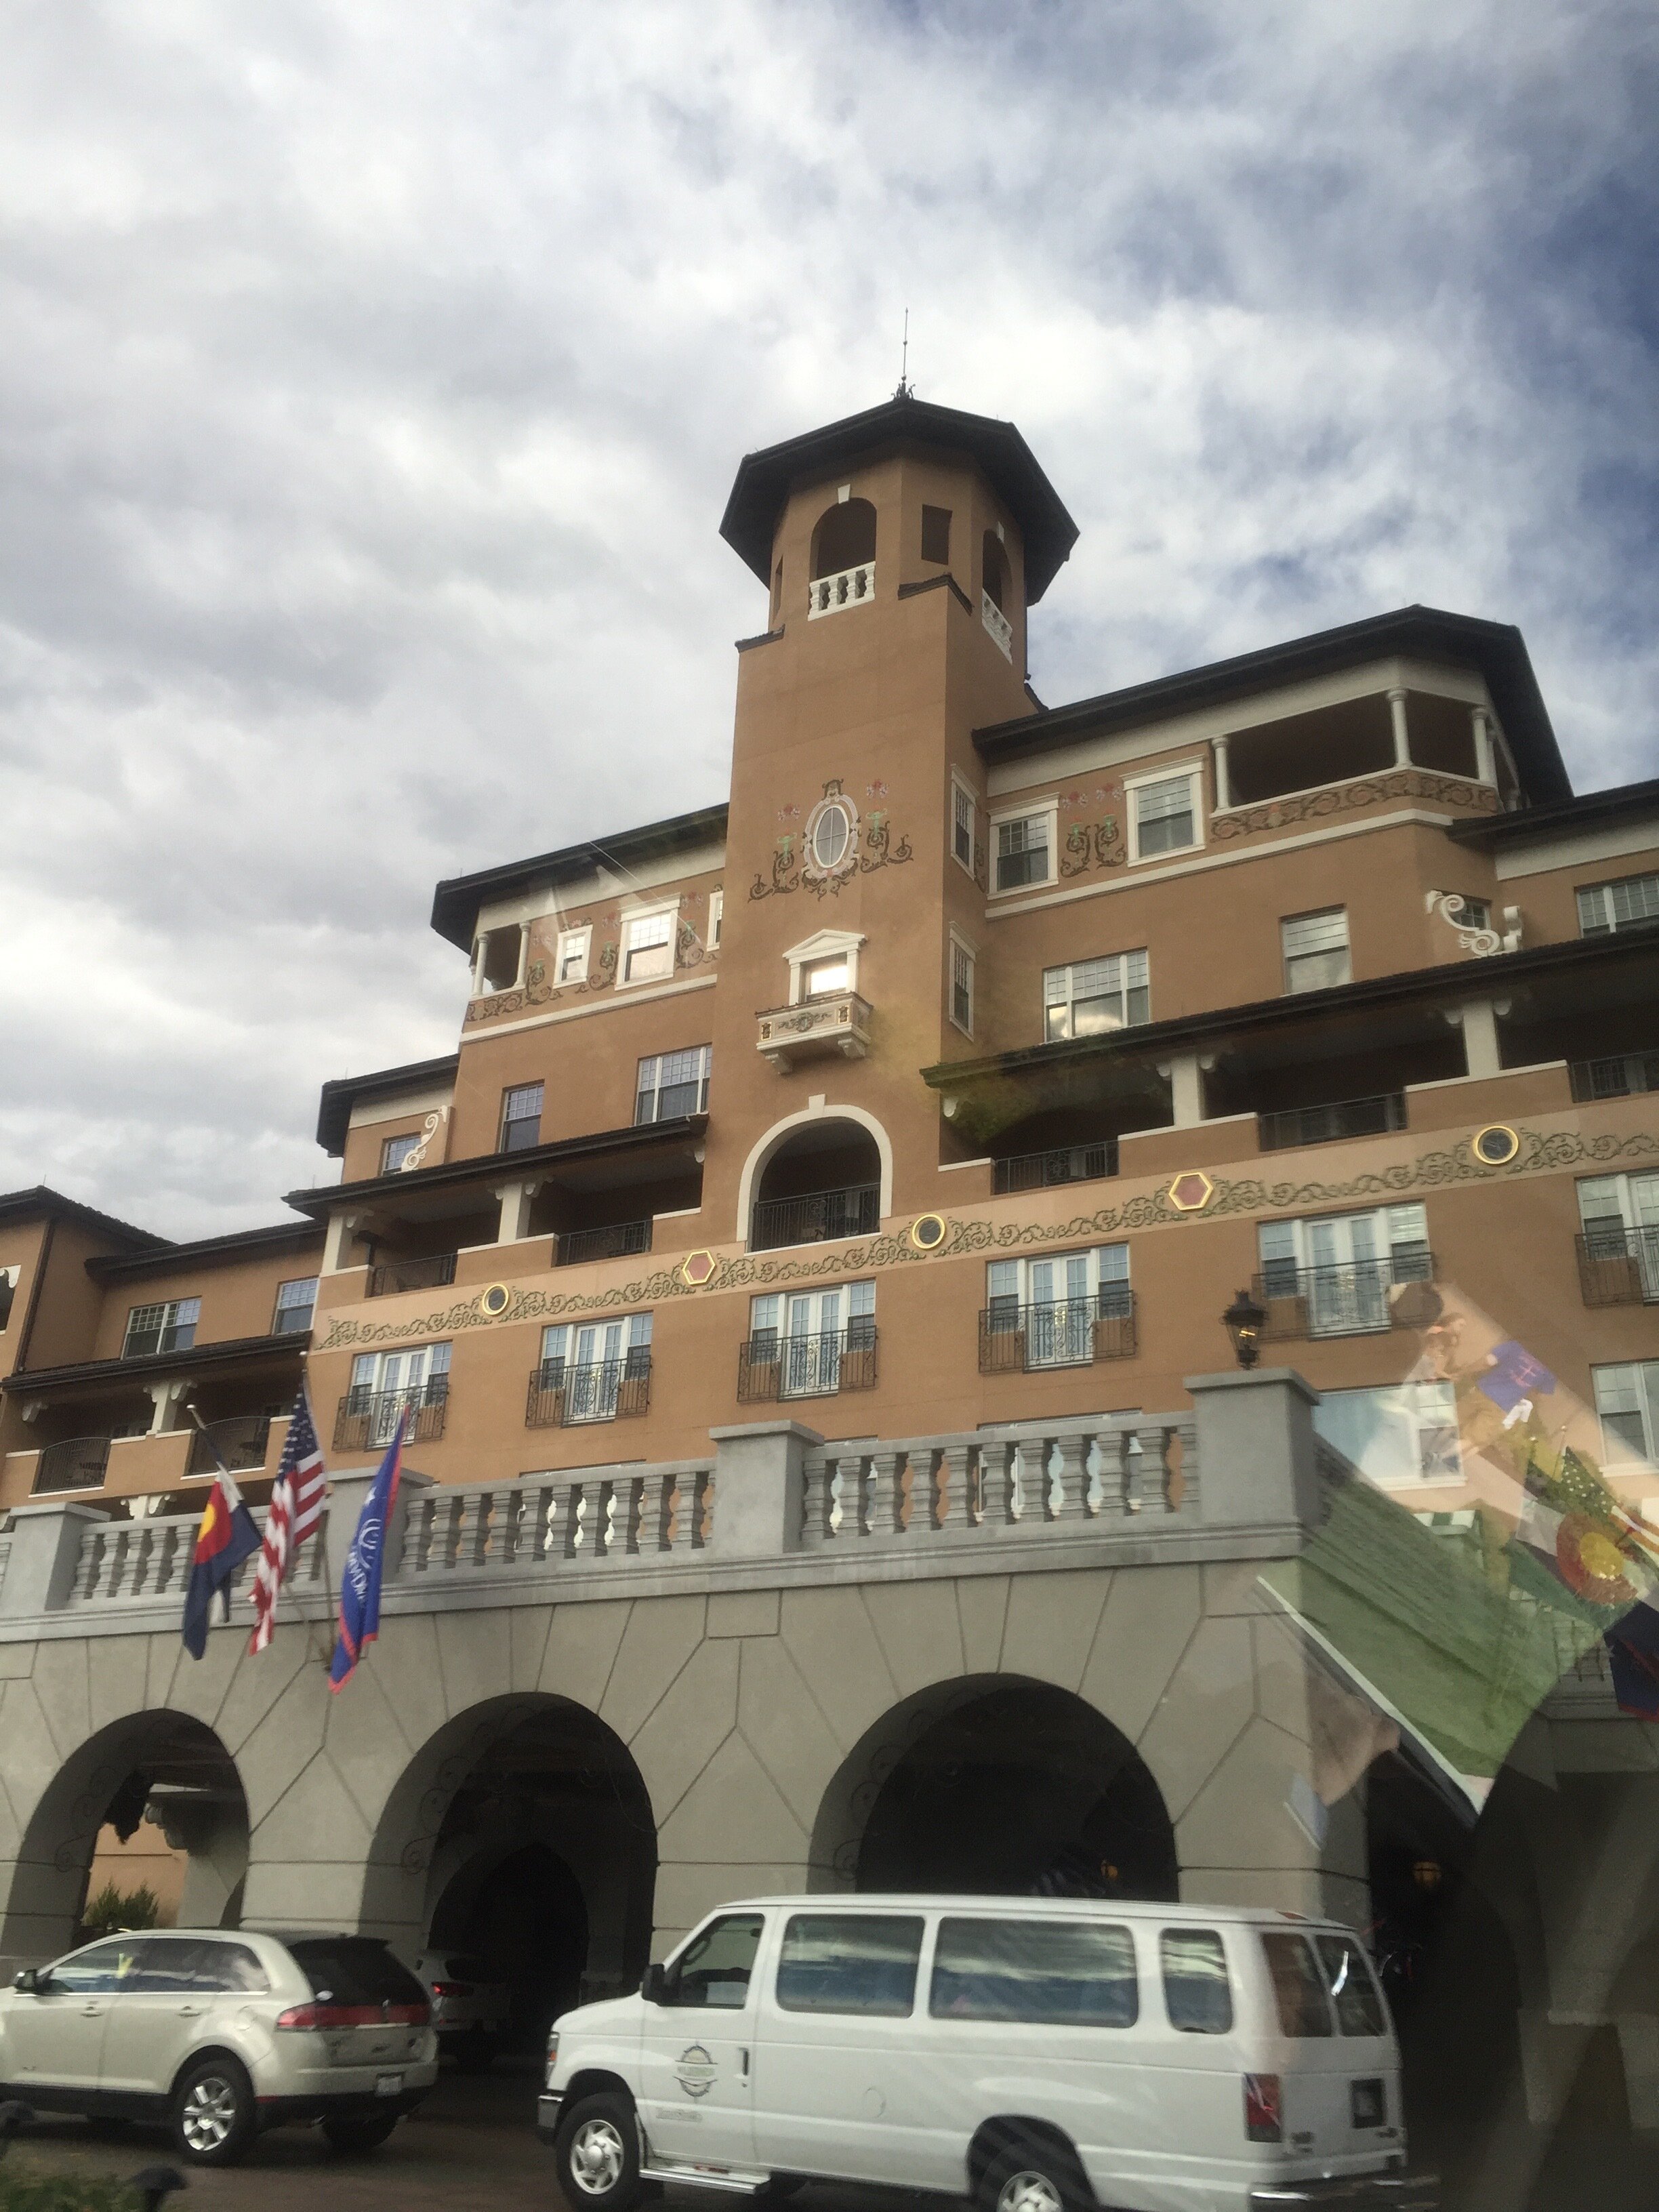 Sponsorship management for a conference at the Broadmoor Resort in Colorado Springs, Colorado